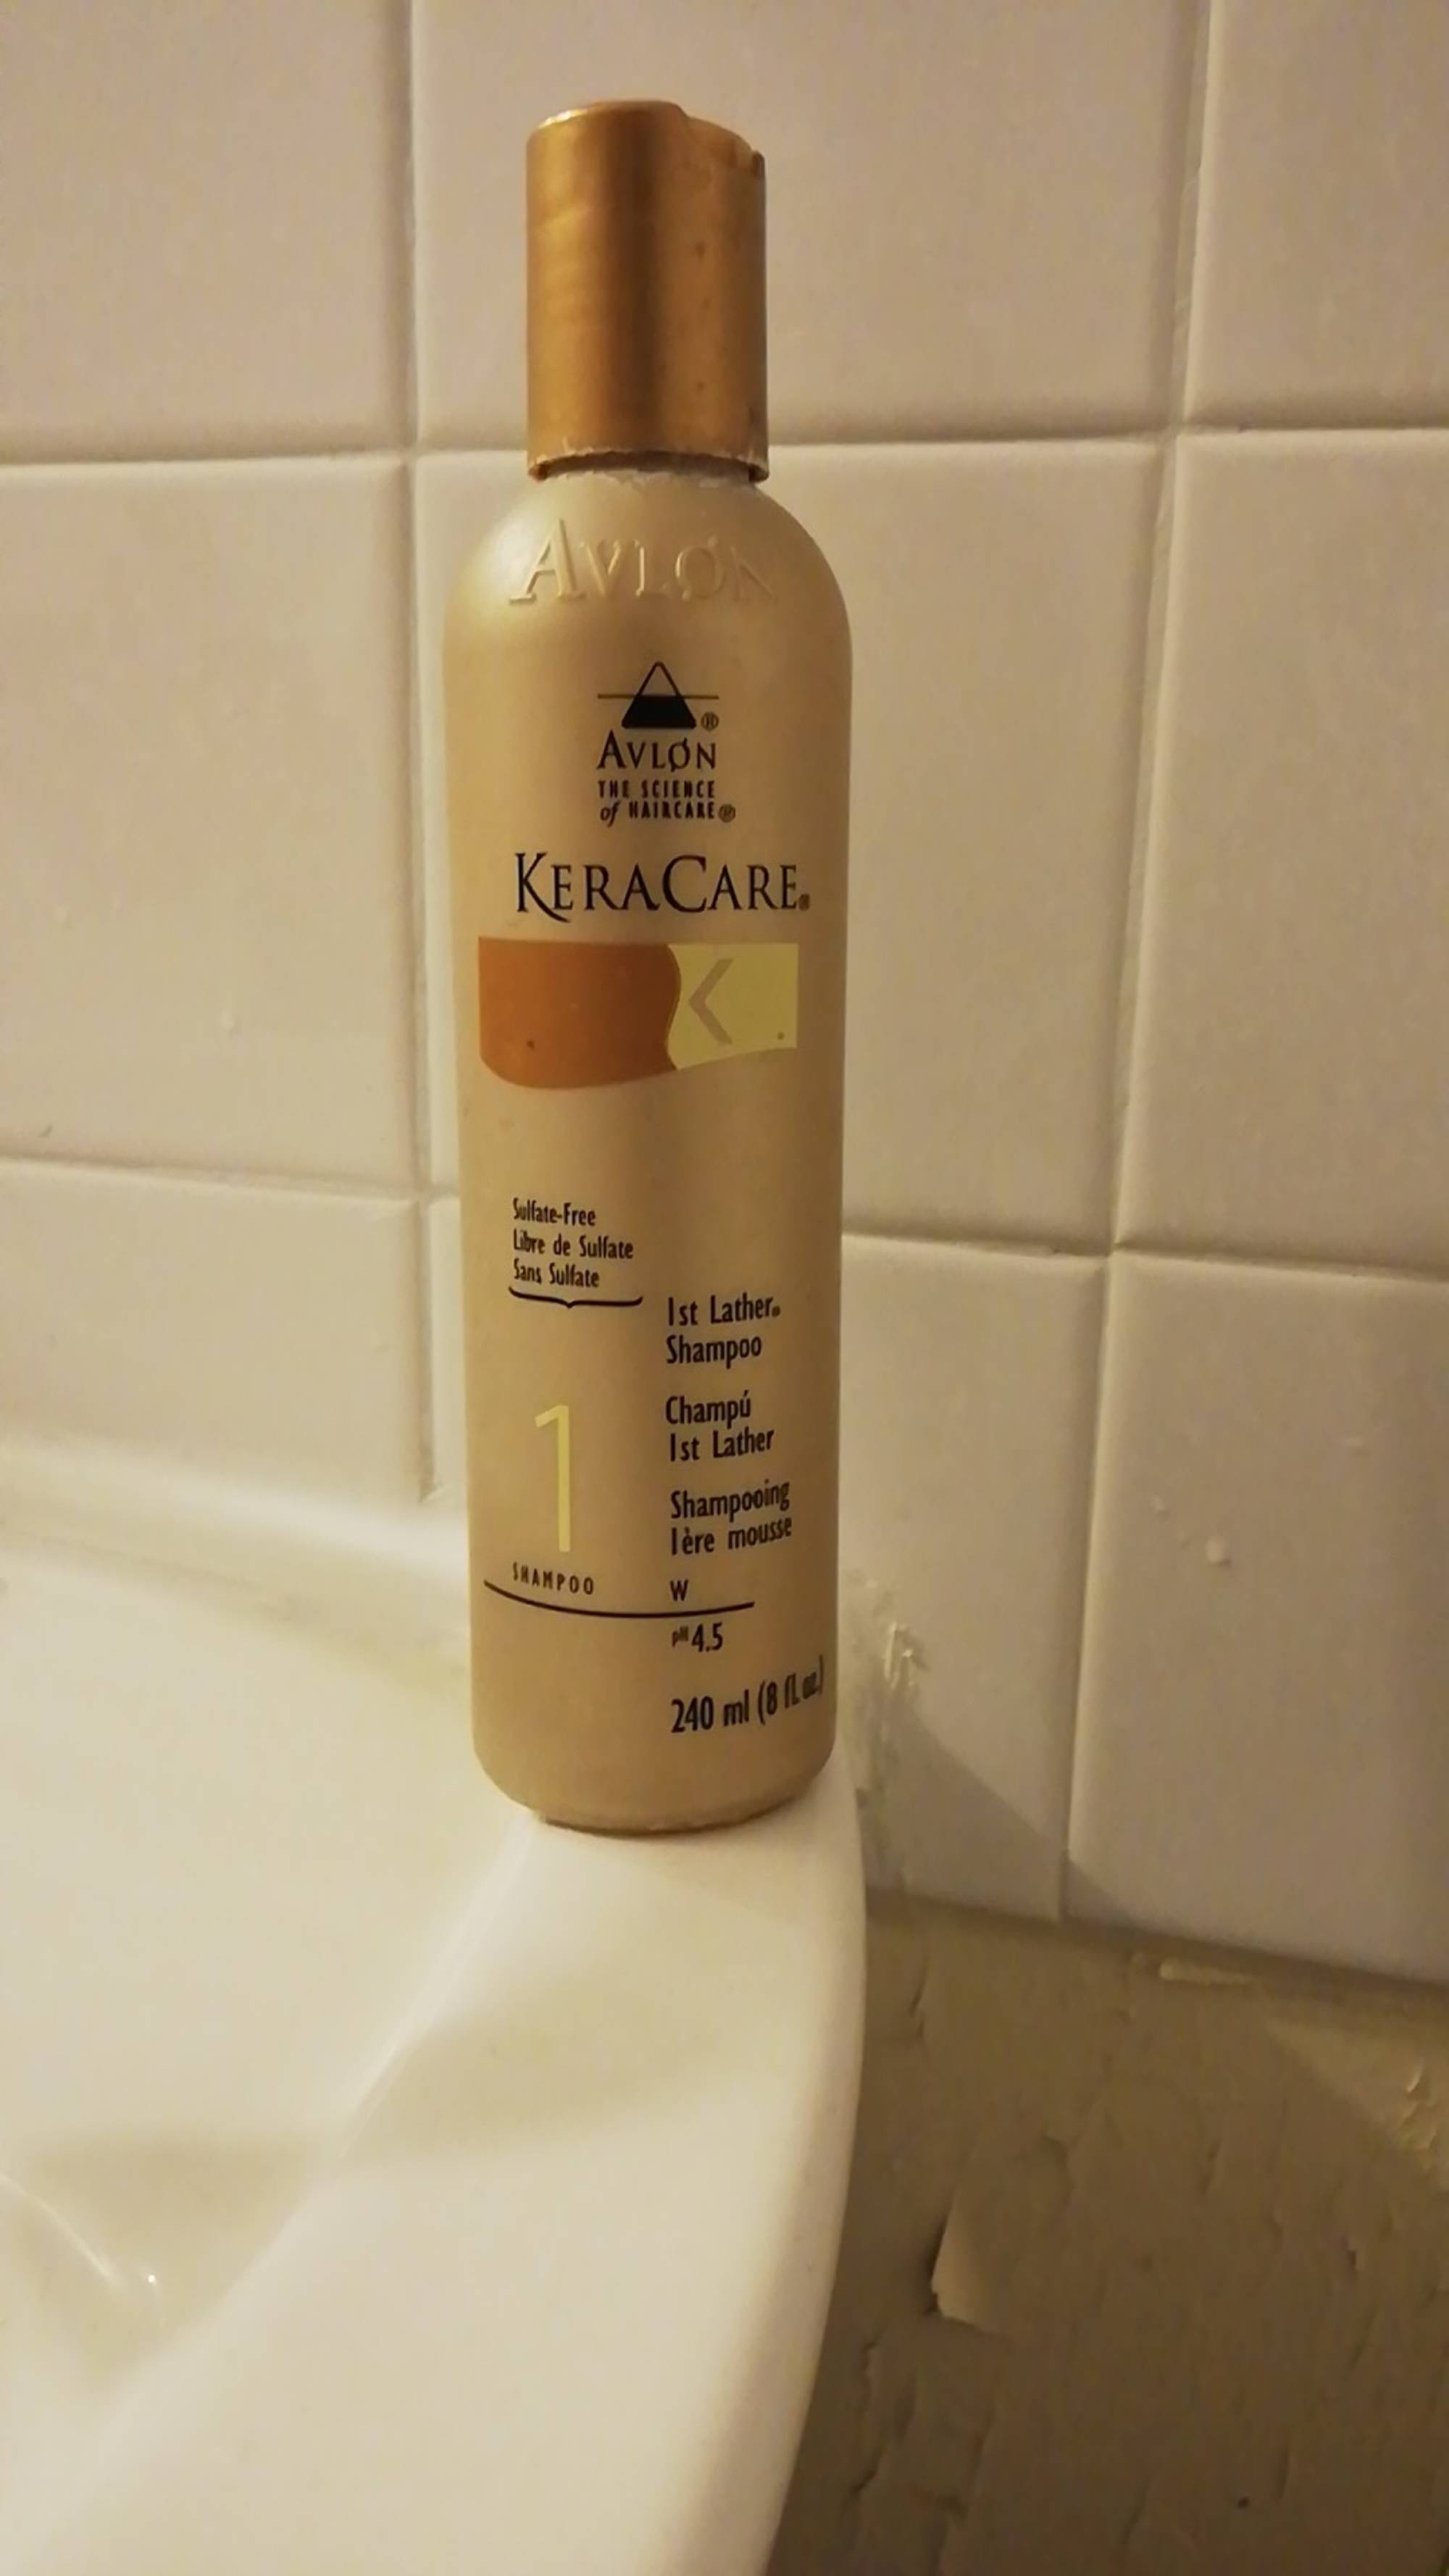 KERACARE - Shampooing 1ère mousse